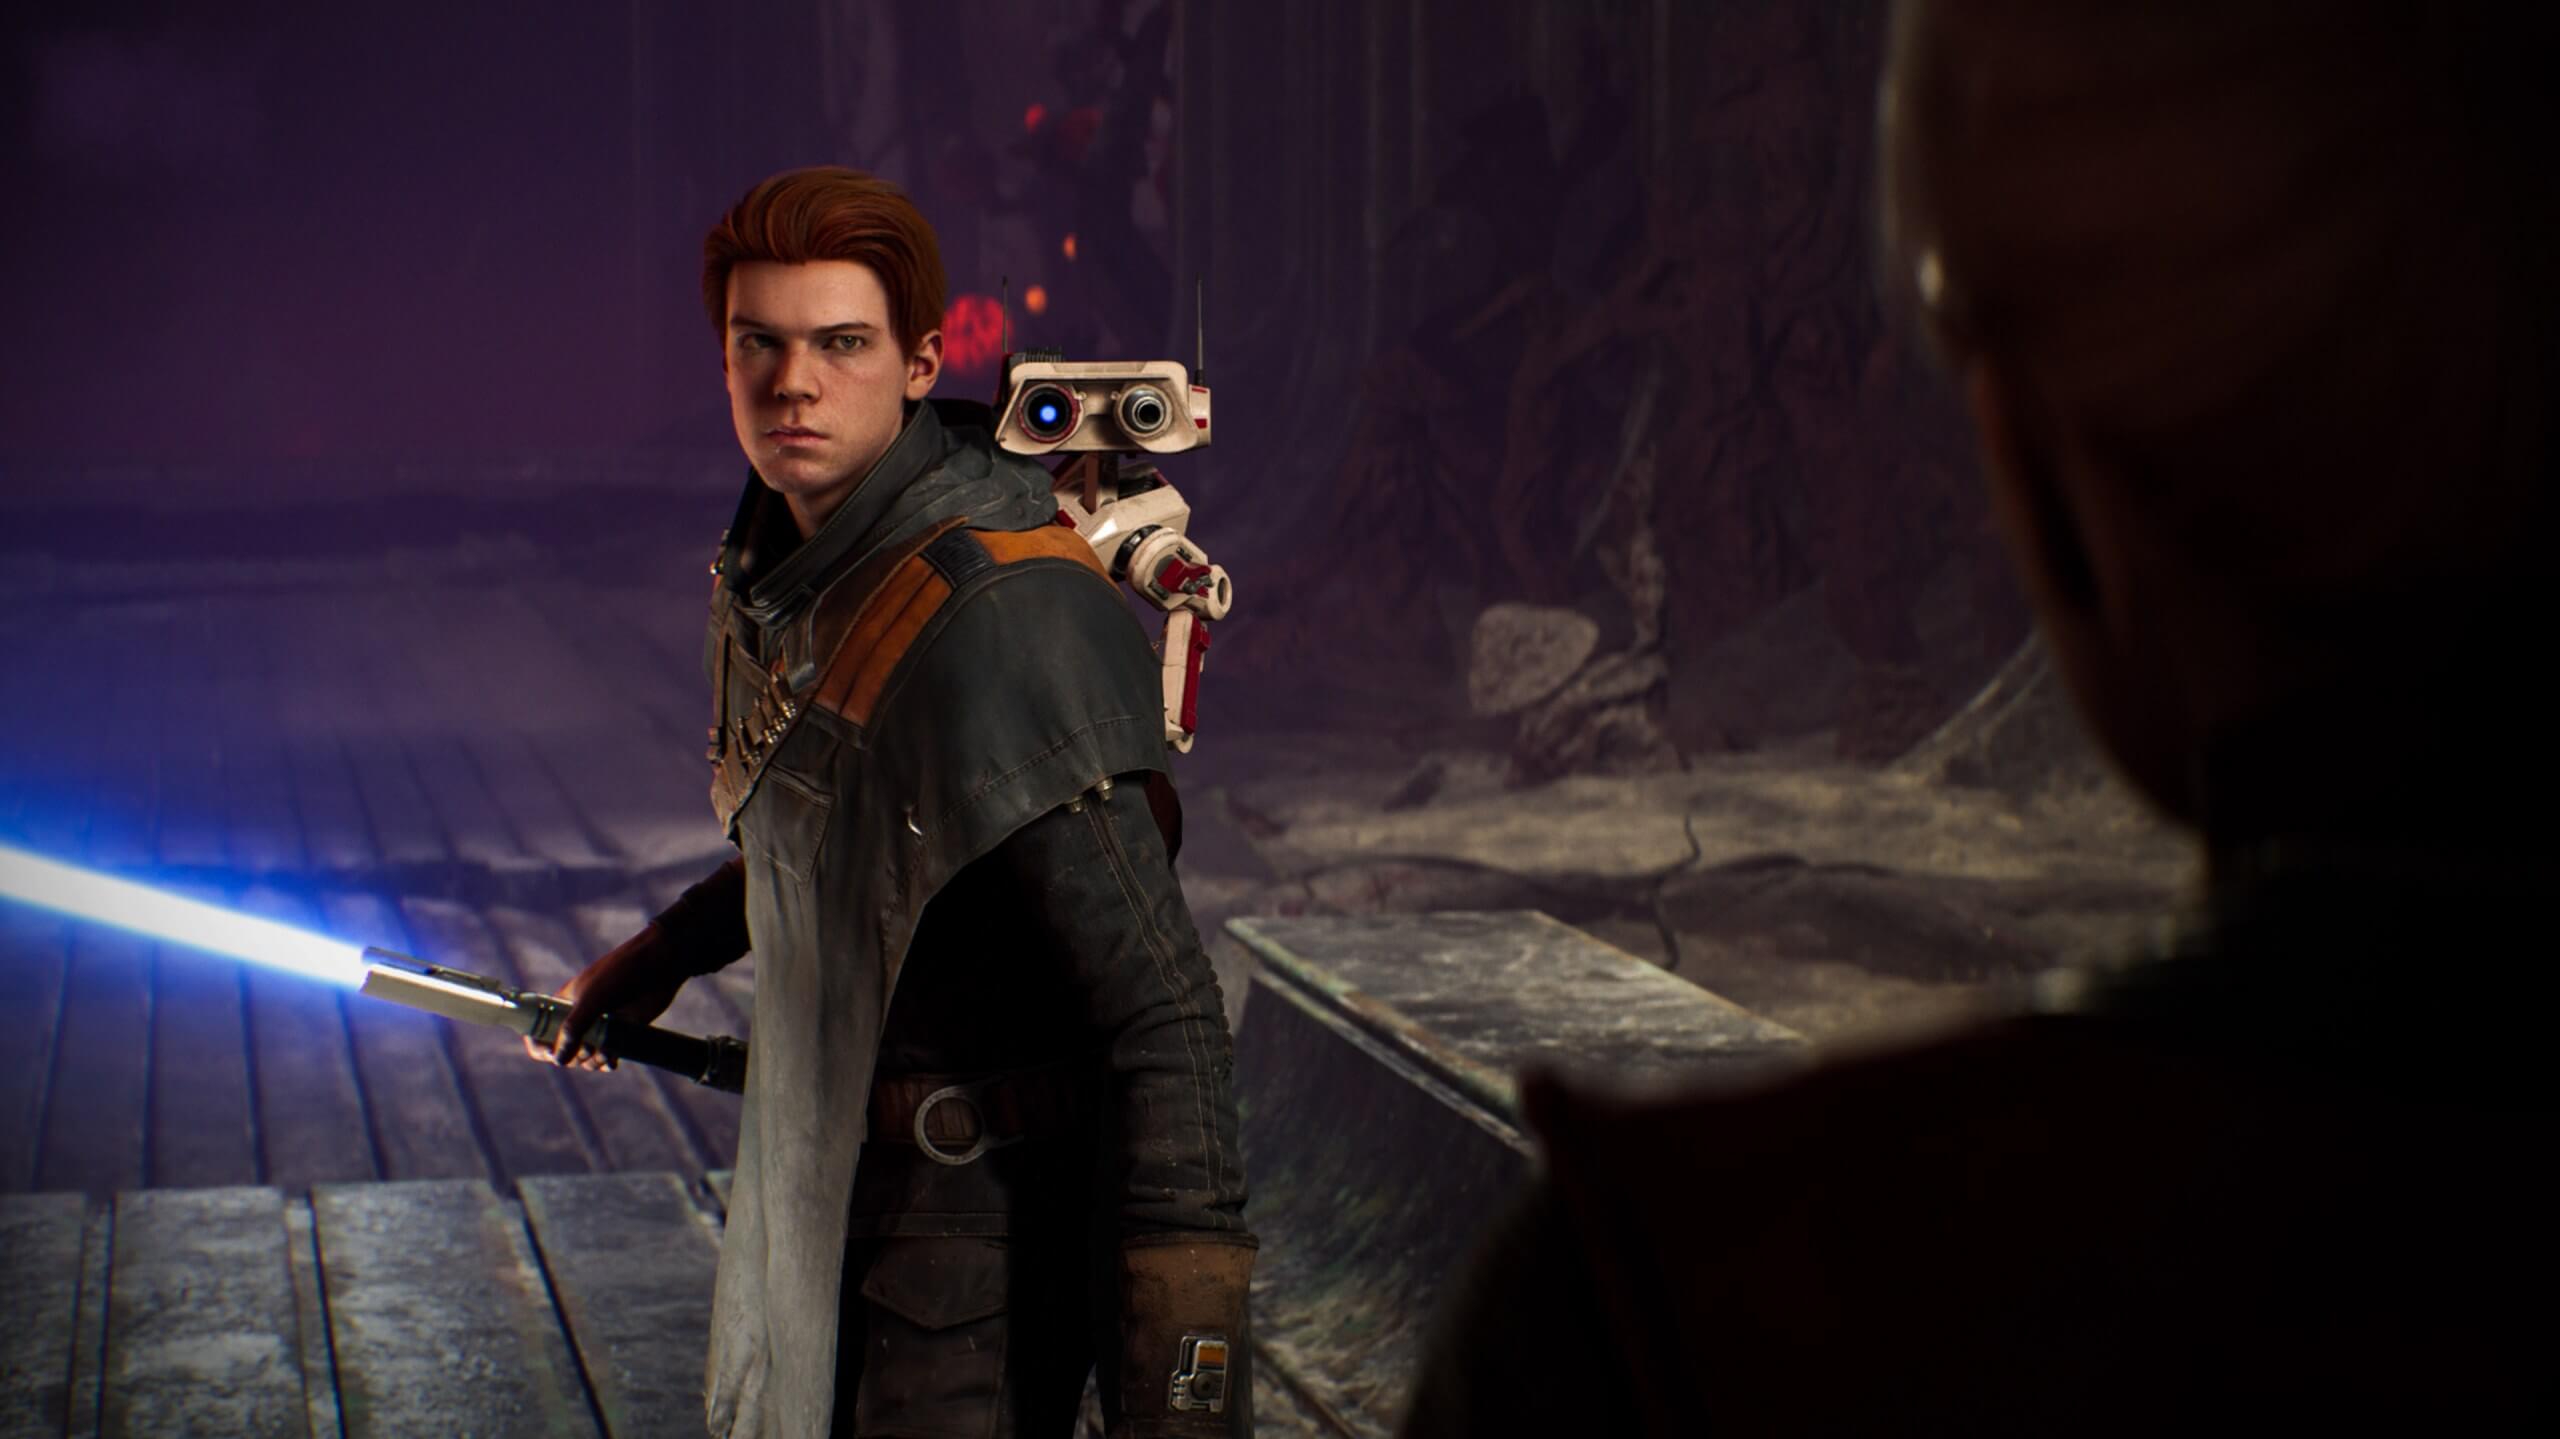 Star Wars Jedi: Fallen Order is the fastest selling digital download of all games in the franchise